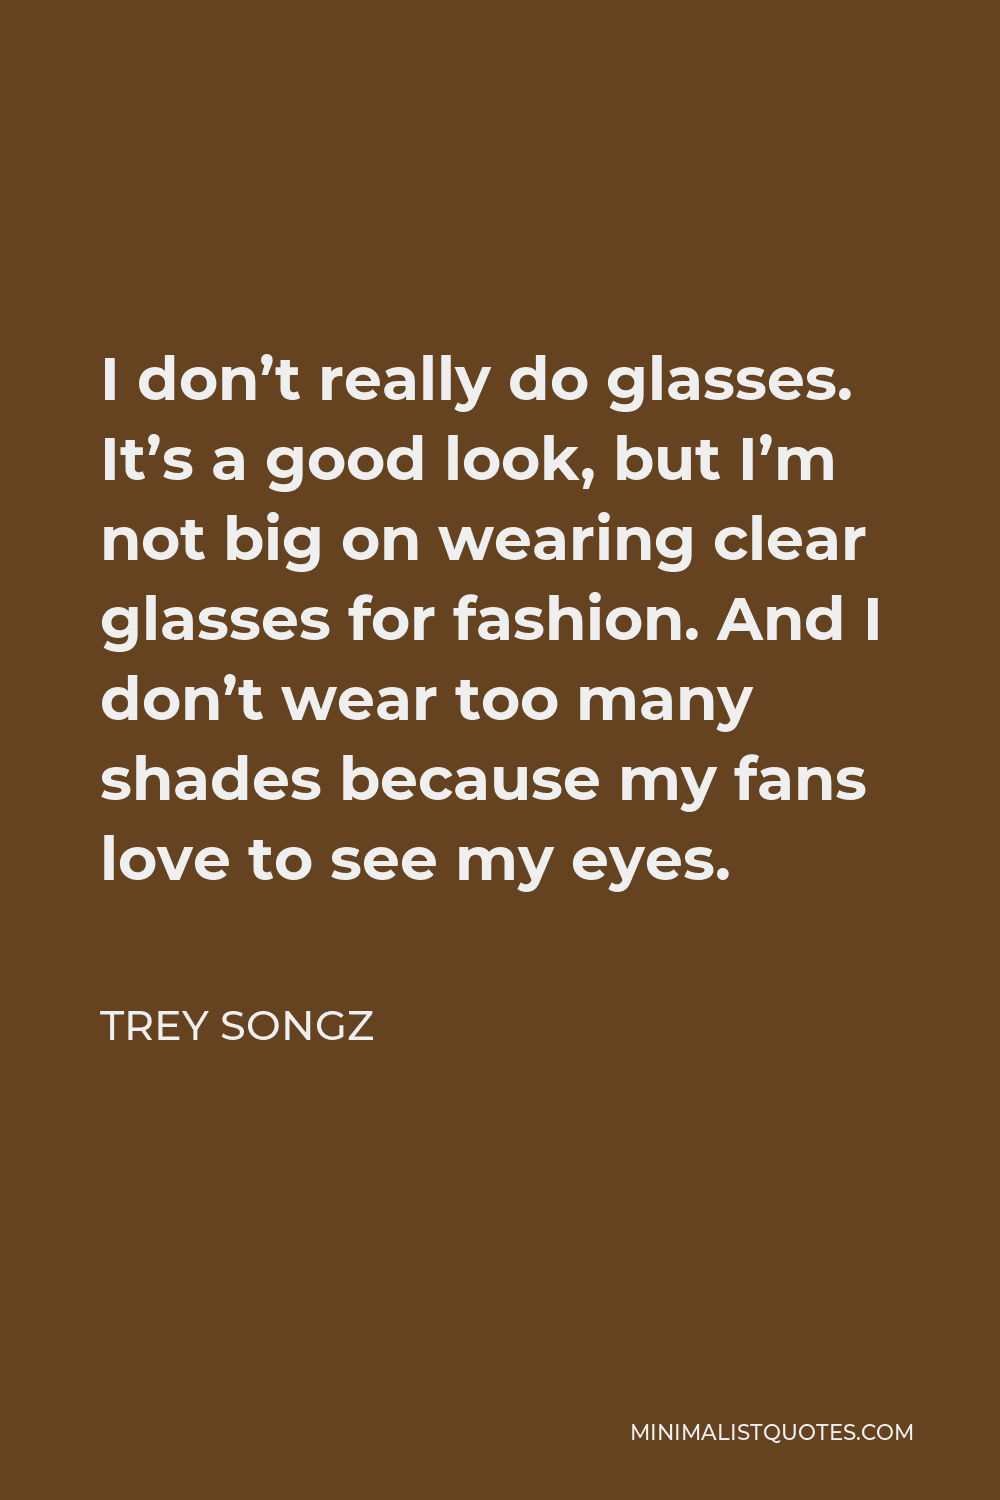 Trey Songz Quote - I don’t really do glasses. It’s a good look, but I’m not big on wearing clear glasses for fashion. And I don’t wear too many shades because my fans love to see my eyes.